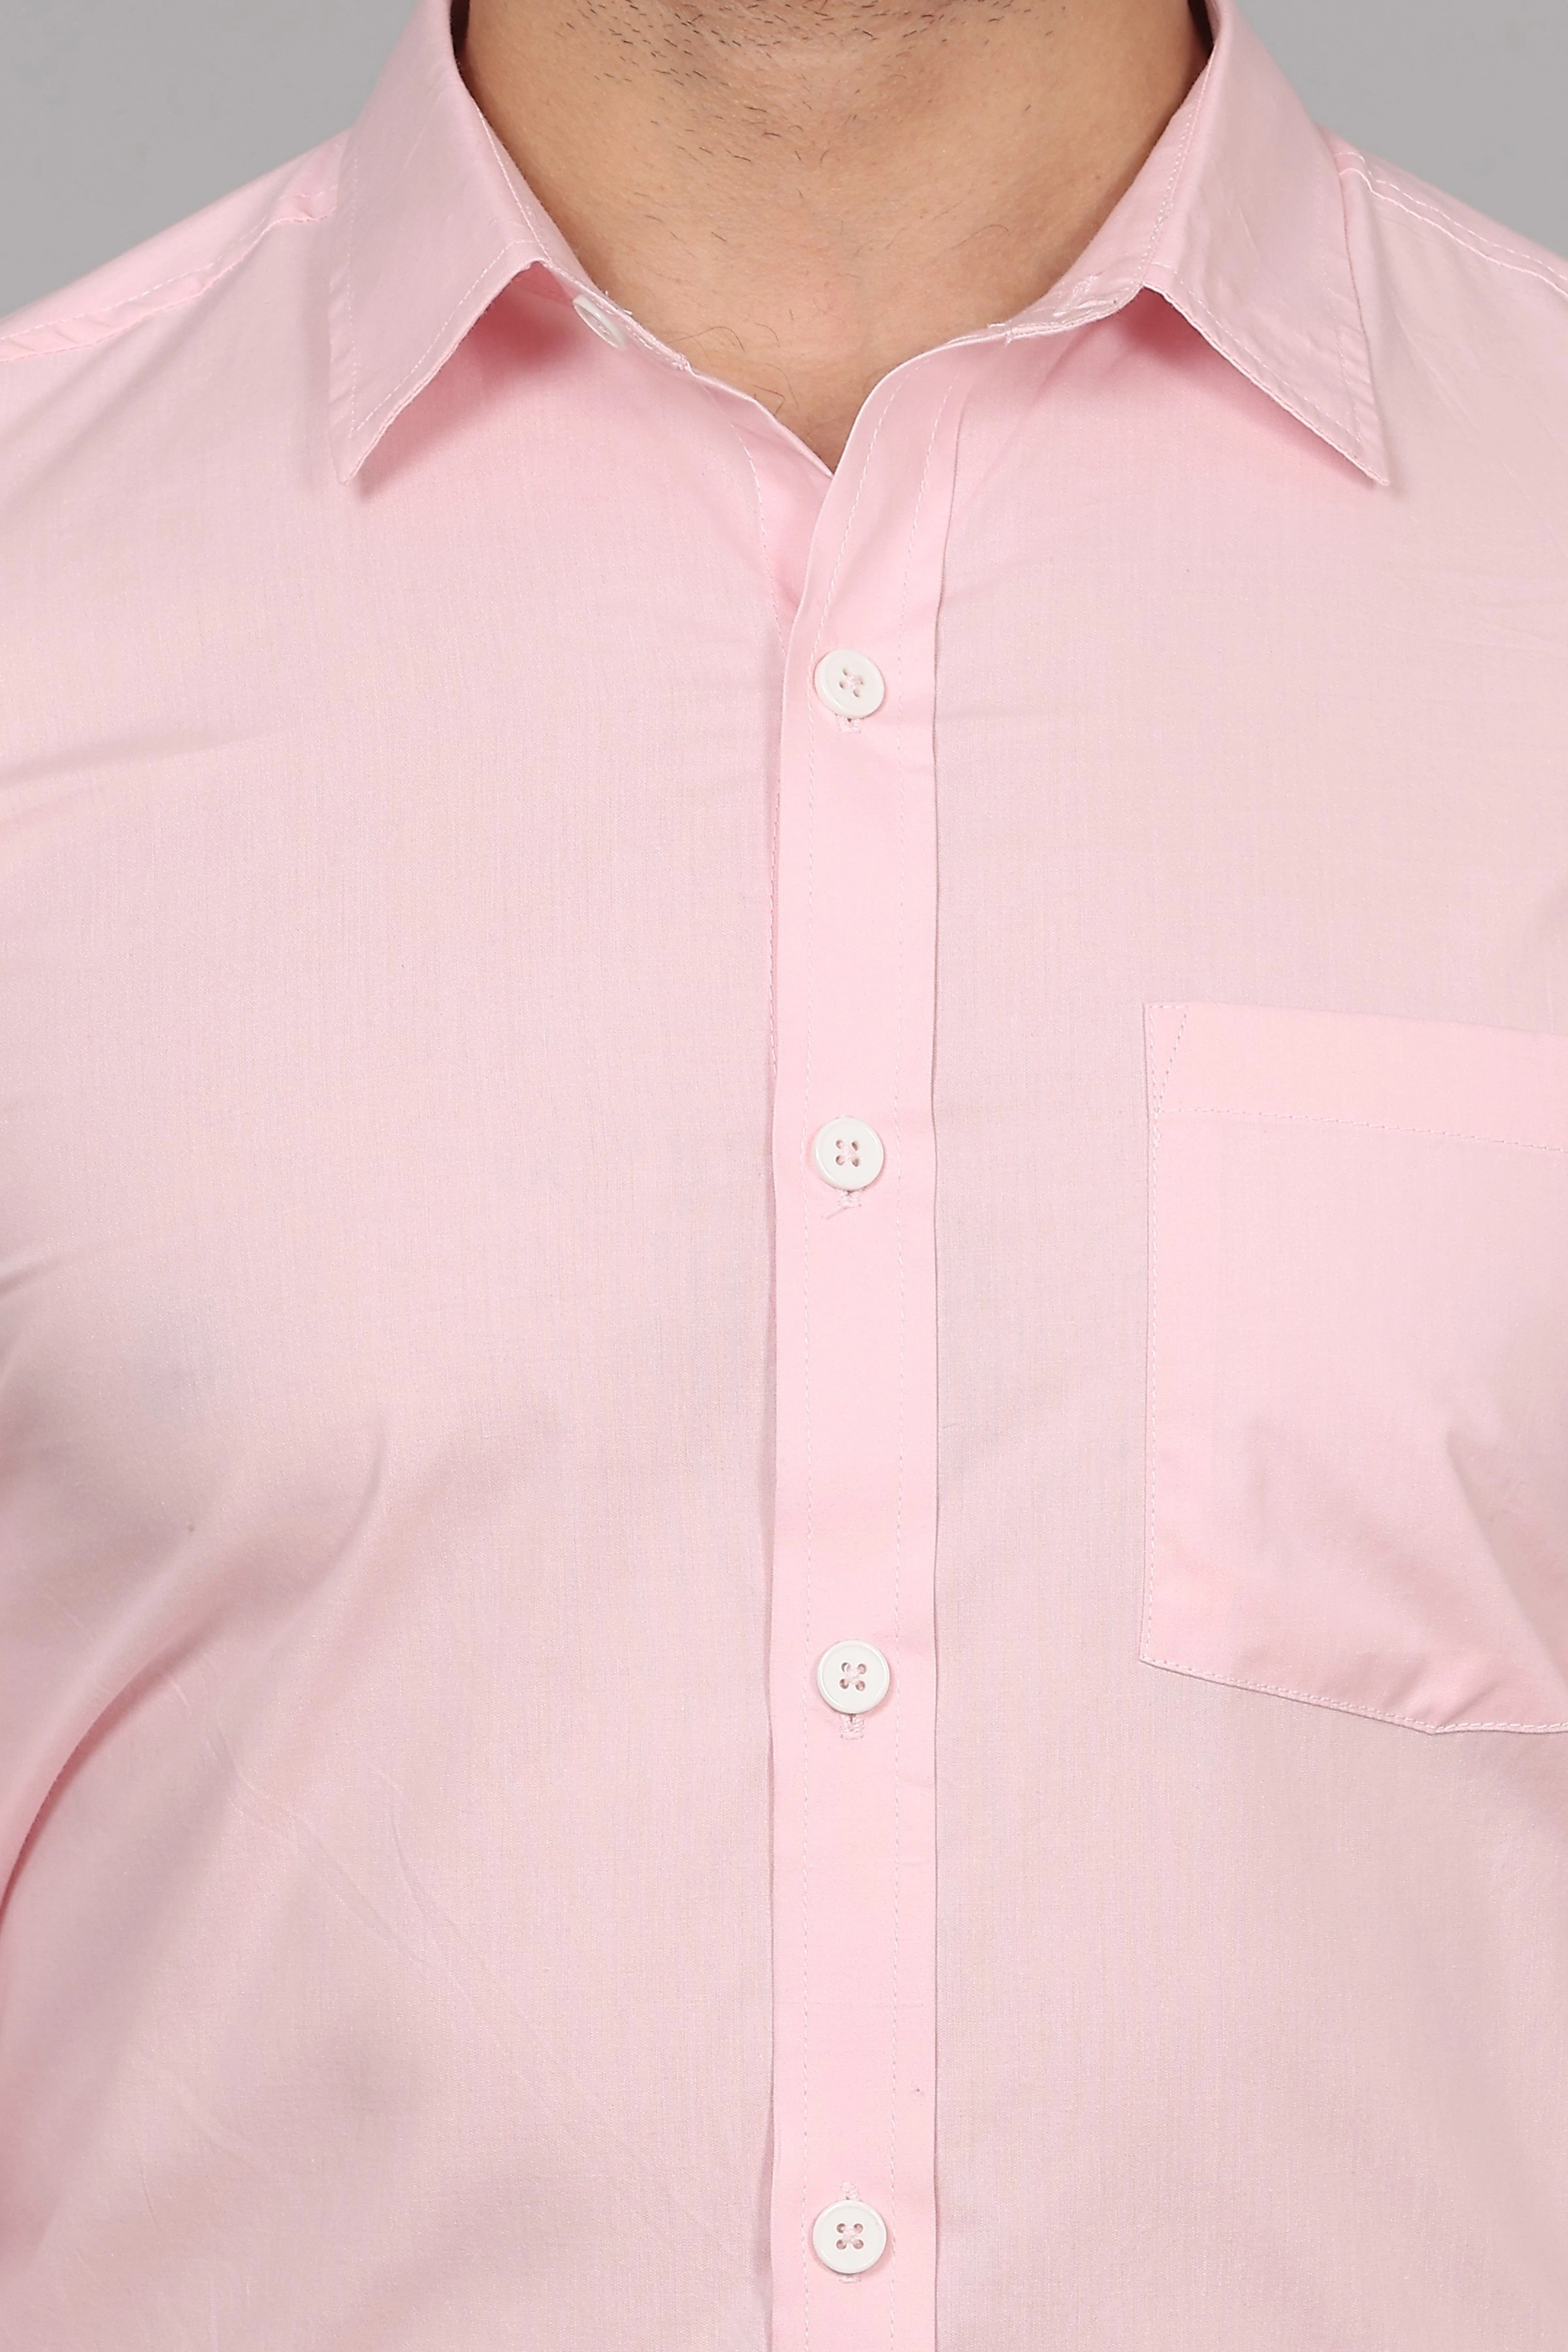 Baby Pink Formal Cotton Shirt-S-5